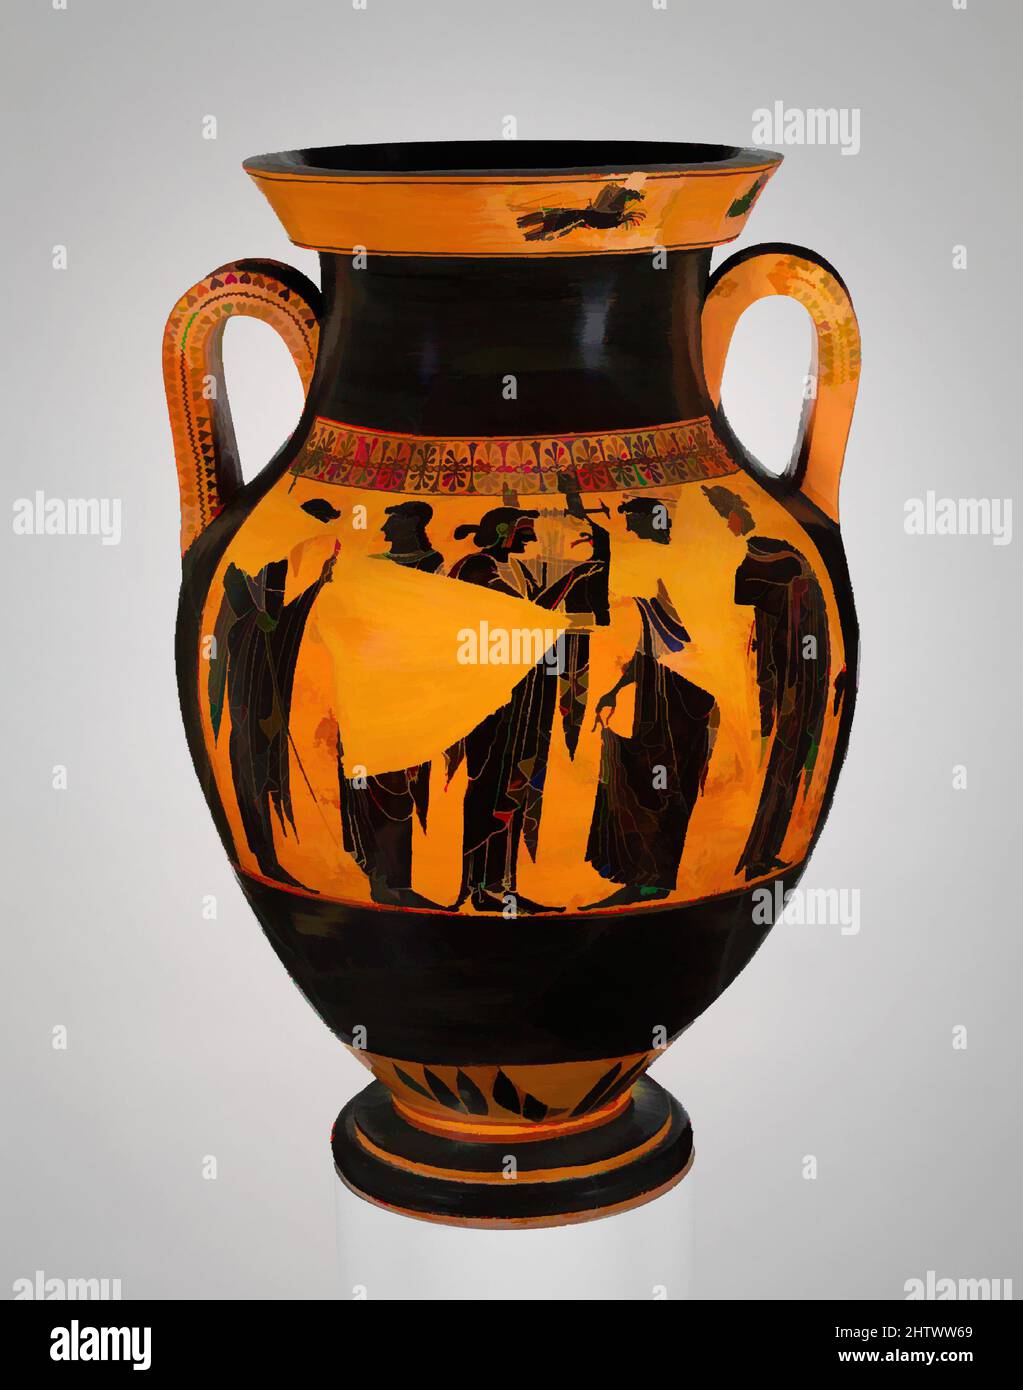 Art inspired by Terracotta amphora (jar), Archaic, ca. 530–520 B.C., Greek, Attic, Terracotta; black-figure, H. 26 in. (66 cm), Vases, Obverse, Athena and Herakles in the gigantomachy (battle of gods and giants), Reverse, Poseidon, Leto, Apollo, Artemis, Dionysos, On the lip, obverse, Classic works modernized by Artotop with a splash of modernity. Shapes, color and value, eye-catching visual impact on art. Emotions through freedom of artworks in a contemporary way. A timeless message pursuing a wildly creative new direction. Artists turning to the digital medium and creating the Artotop NFT Stock Photo